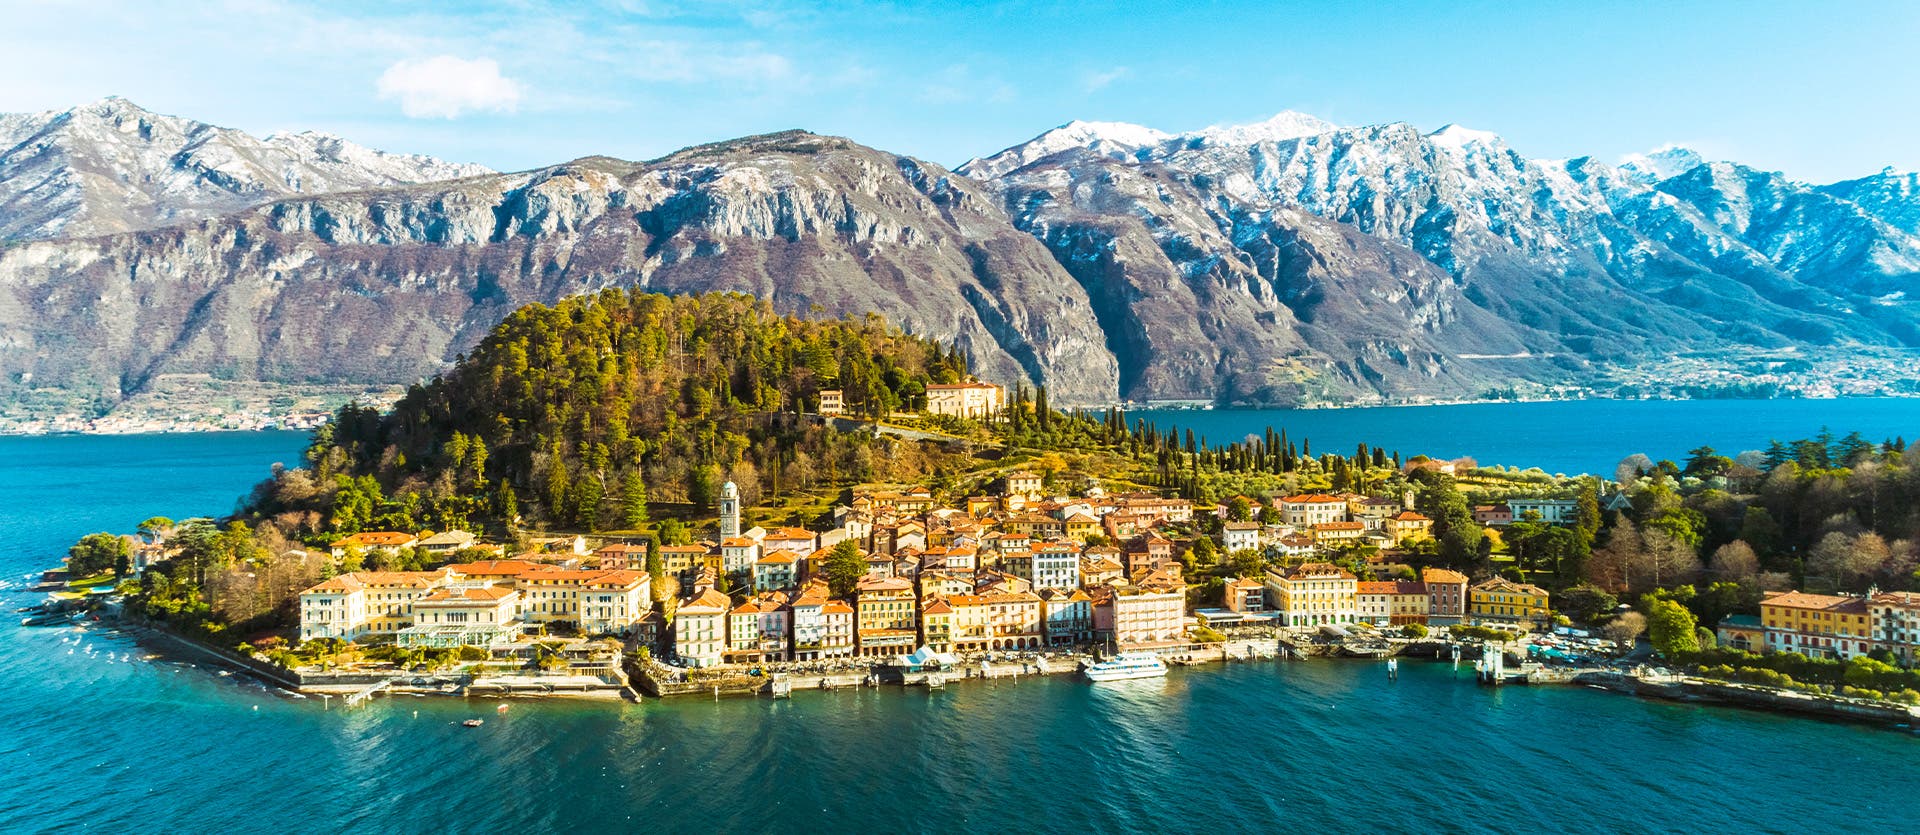 What to see in Italie Lake Como